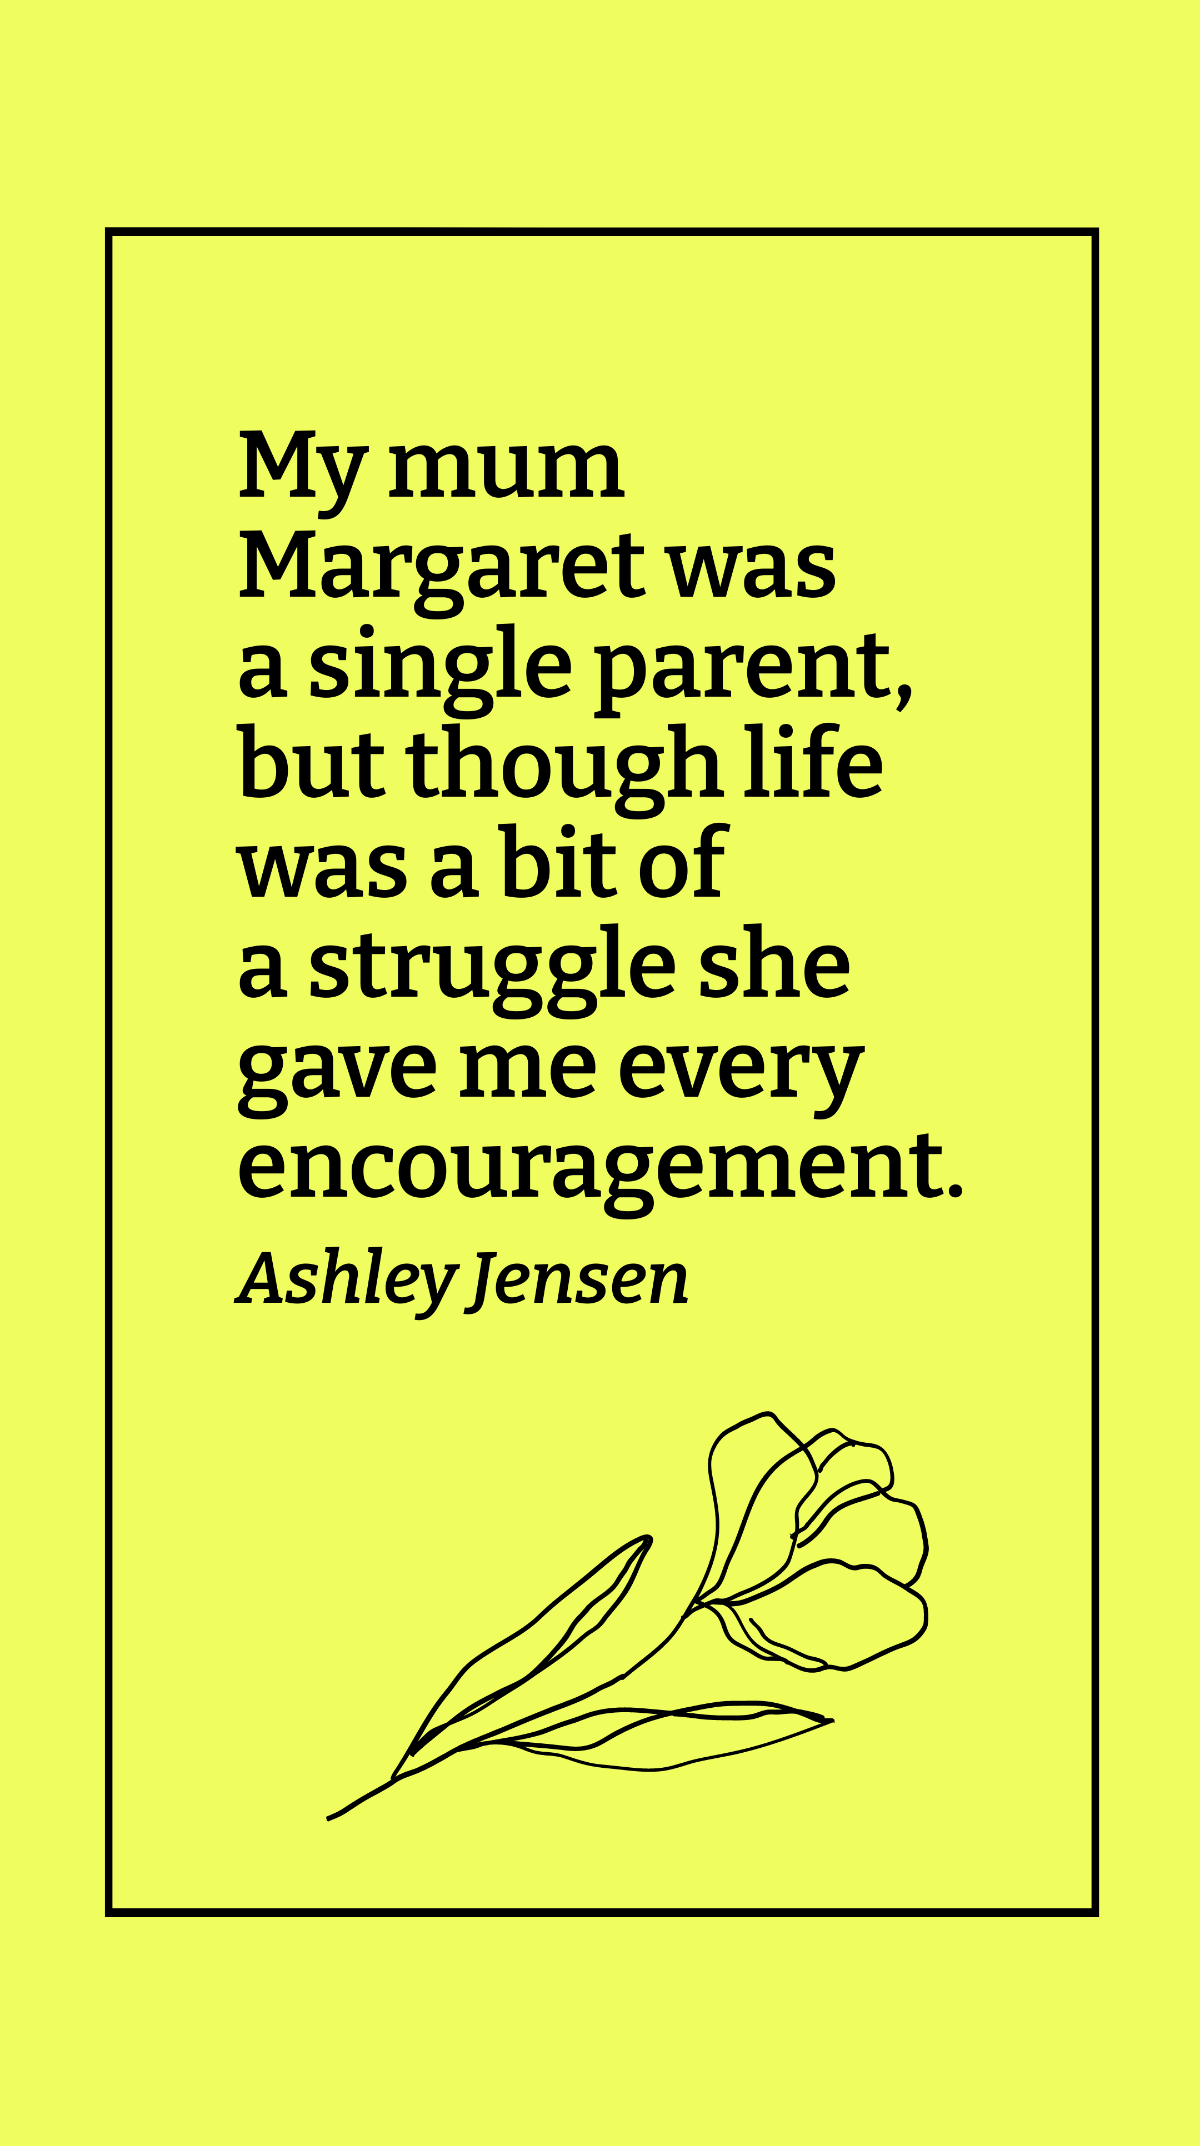 Ashley Jensen - My mum Margaret was a single parent, but though life was a bit of a struggle she gave me every encouragement. Template